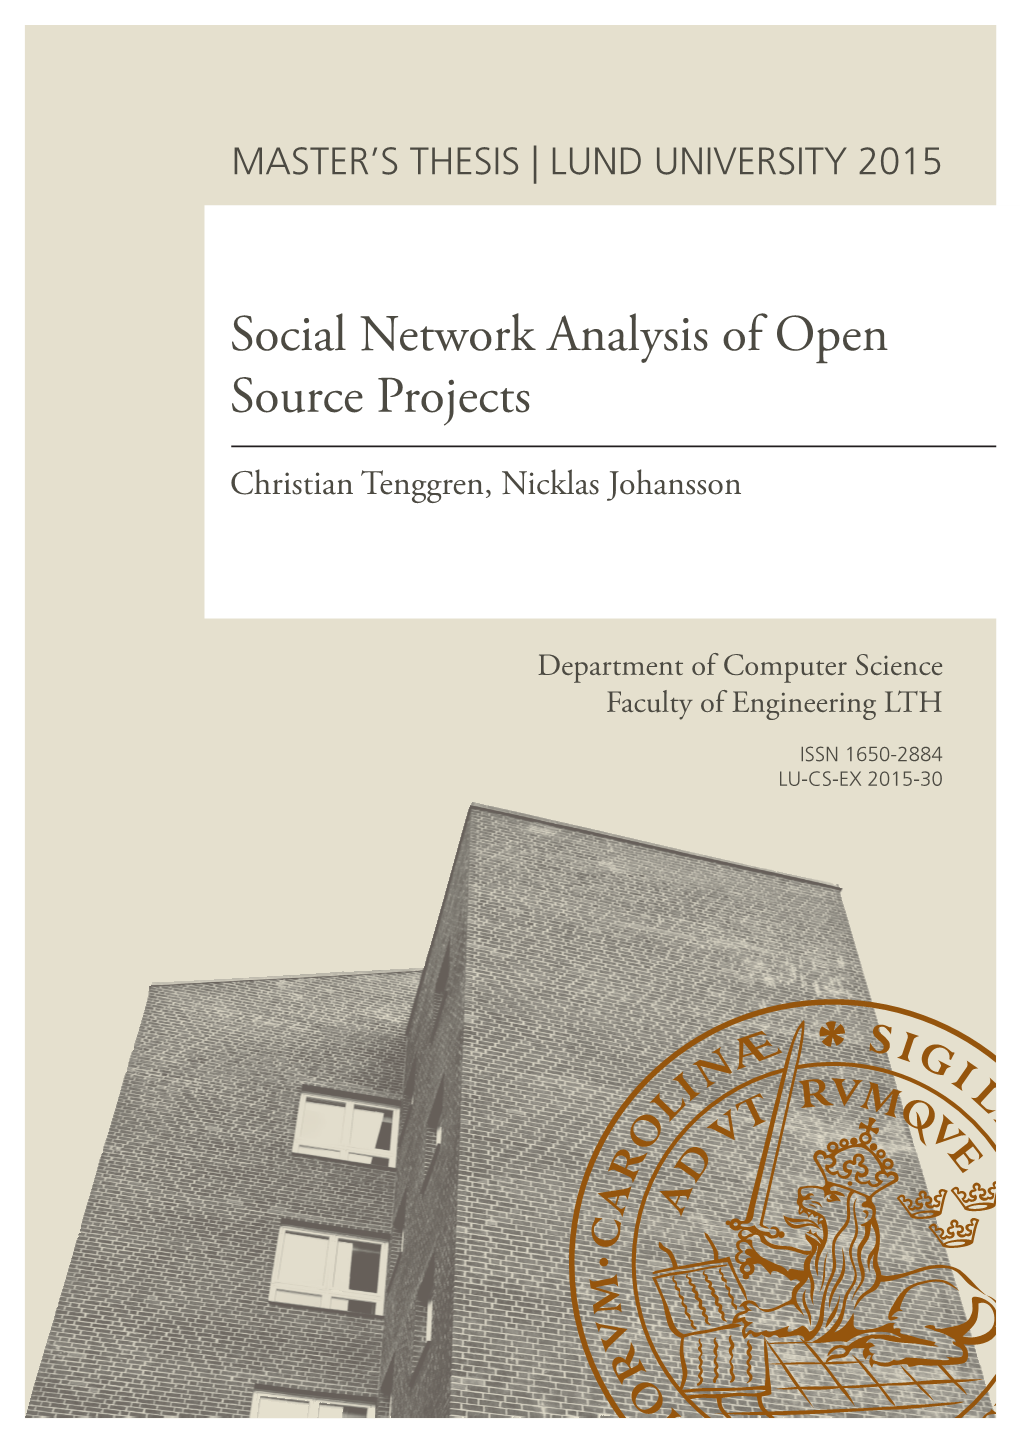 Social Network Analysis of Open Source Projects